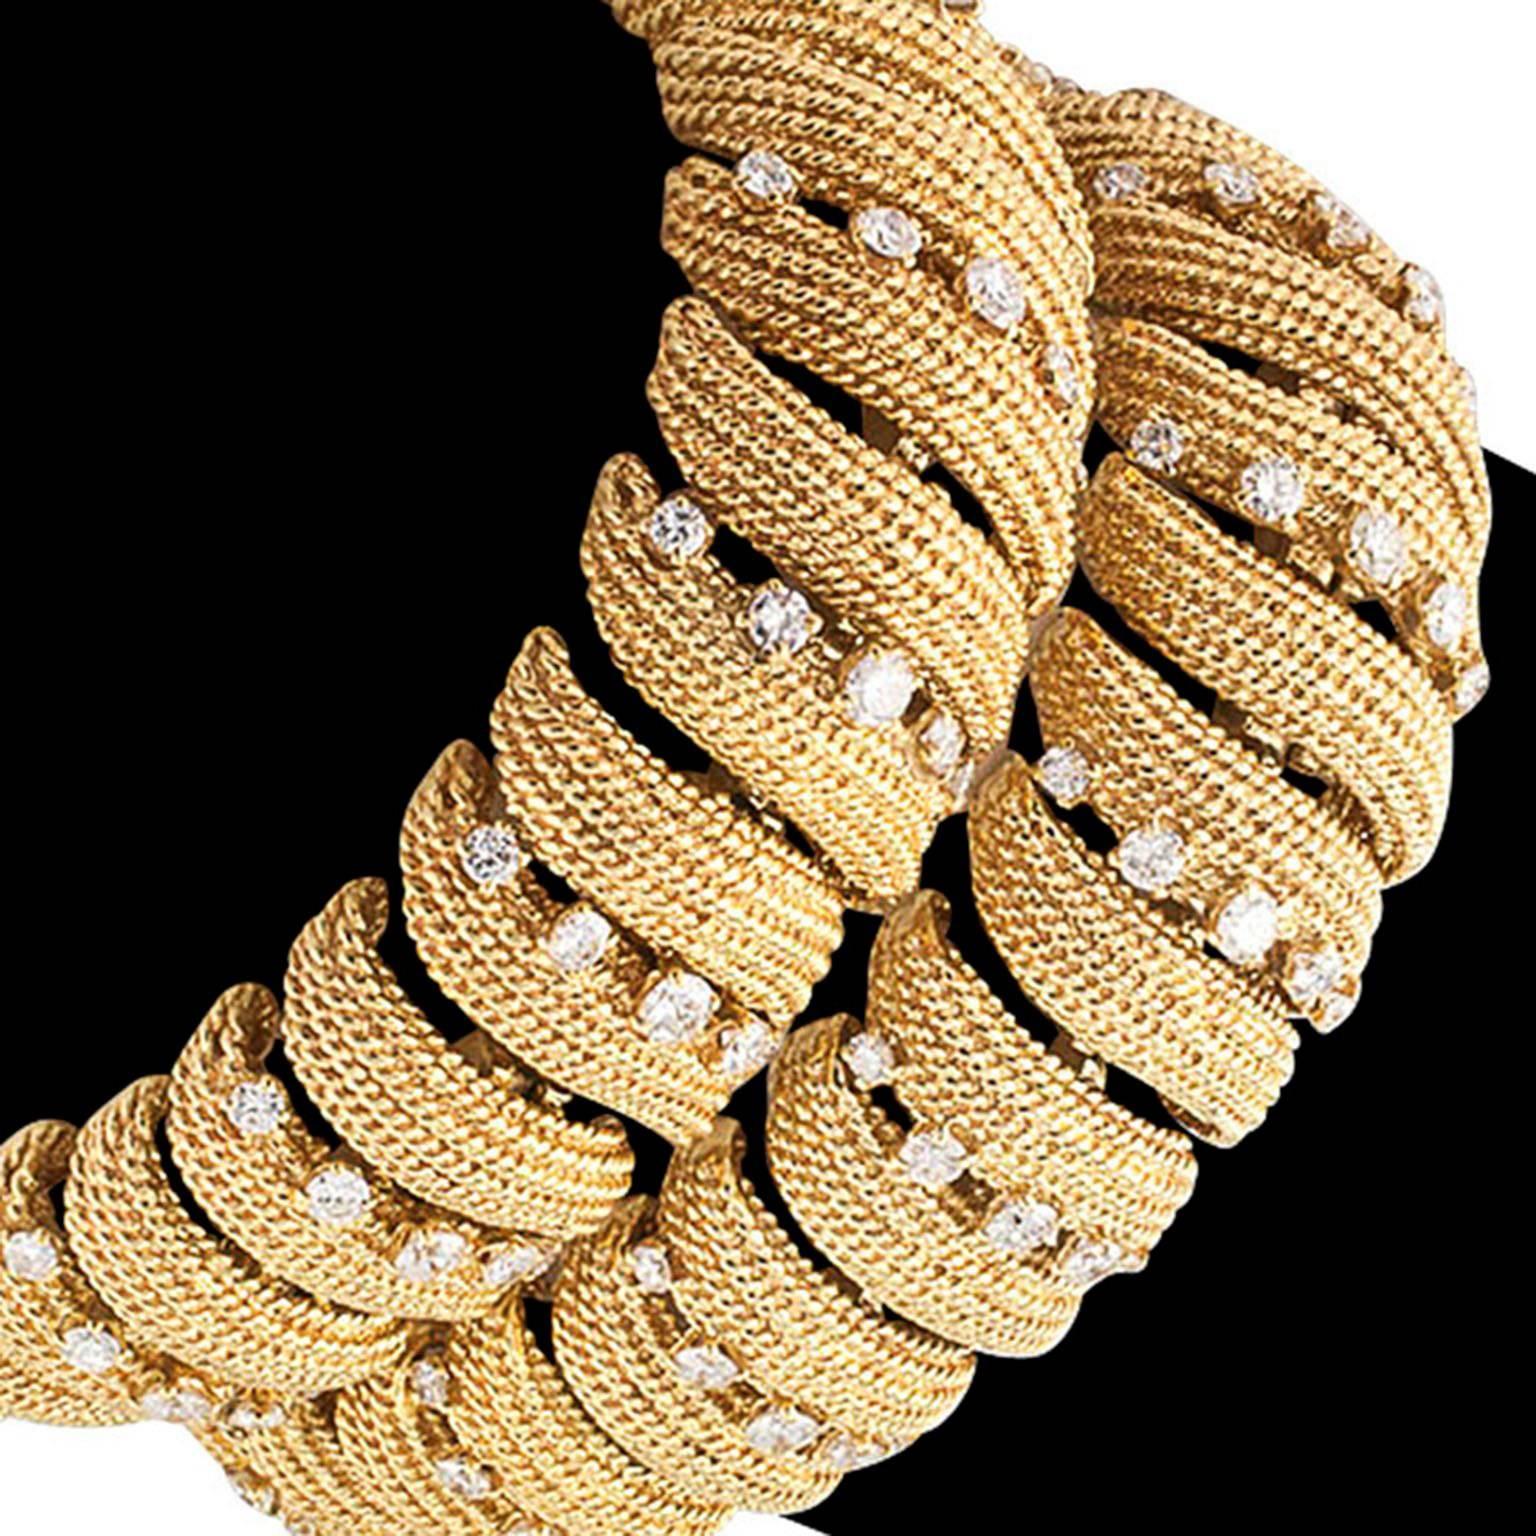 David Webb Estate Pair of Gold and Diamond Link Bracelets

Some say less is more, but more of certain things is unquestionably better, as in not just one, but rather, a pair of matching gold and diamond bracelets to slide up and down your wrist with